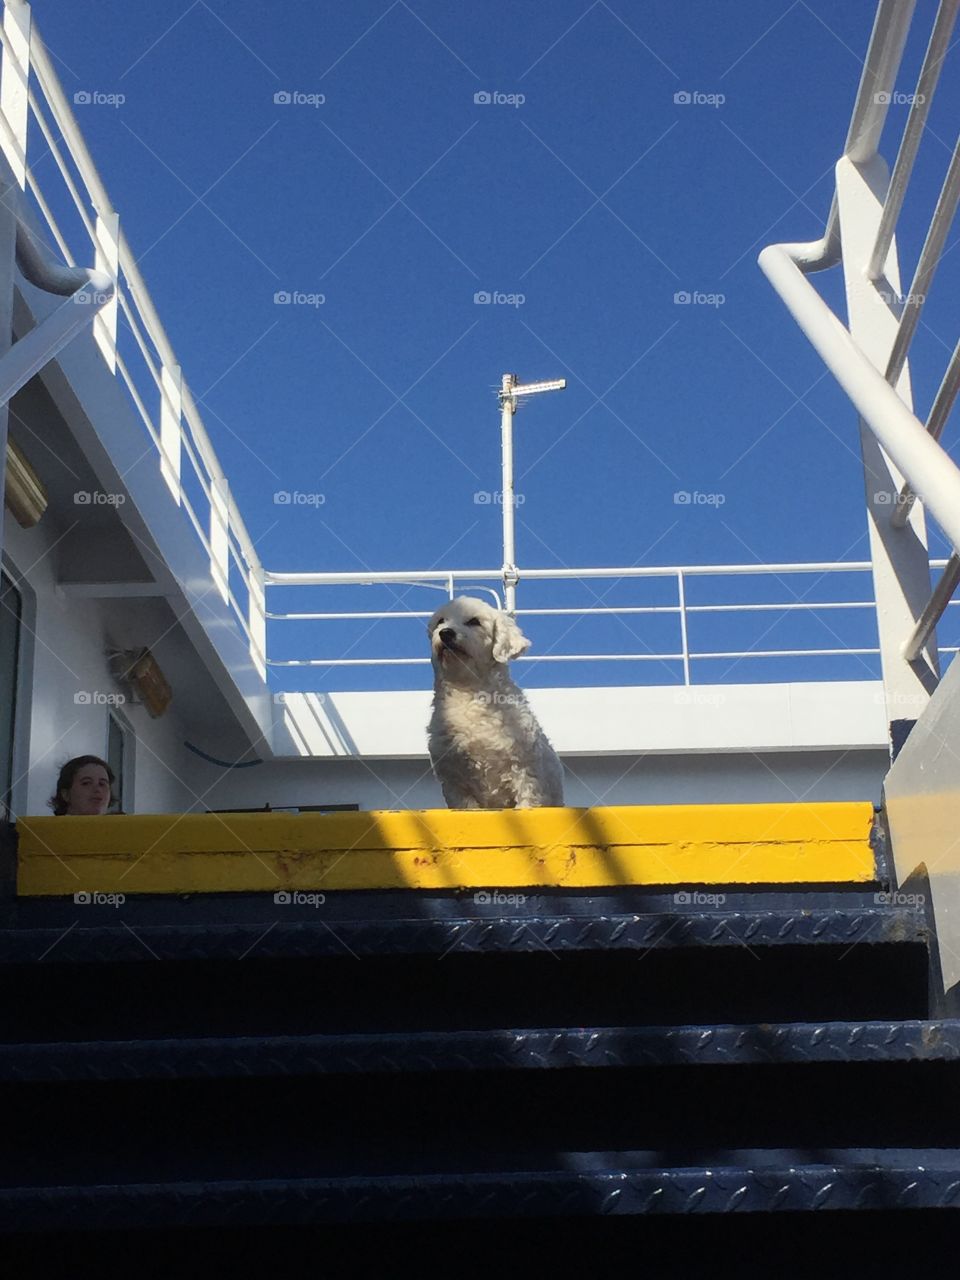 My Dog on the Ferry 